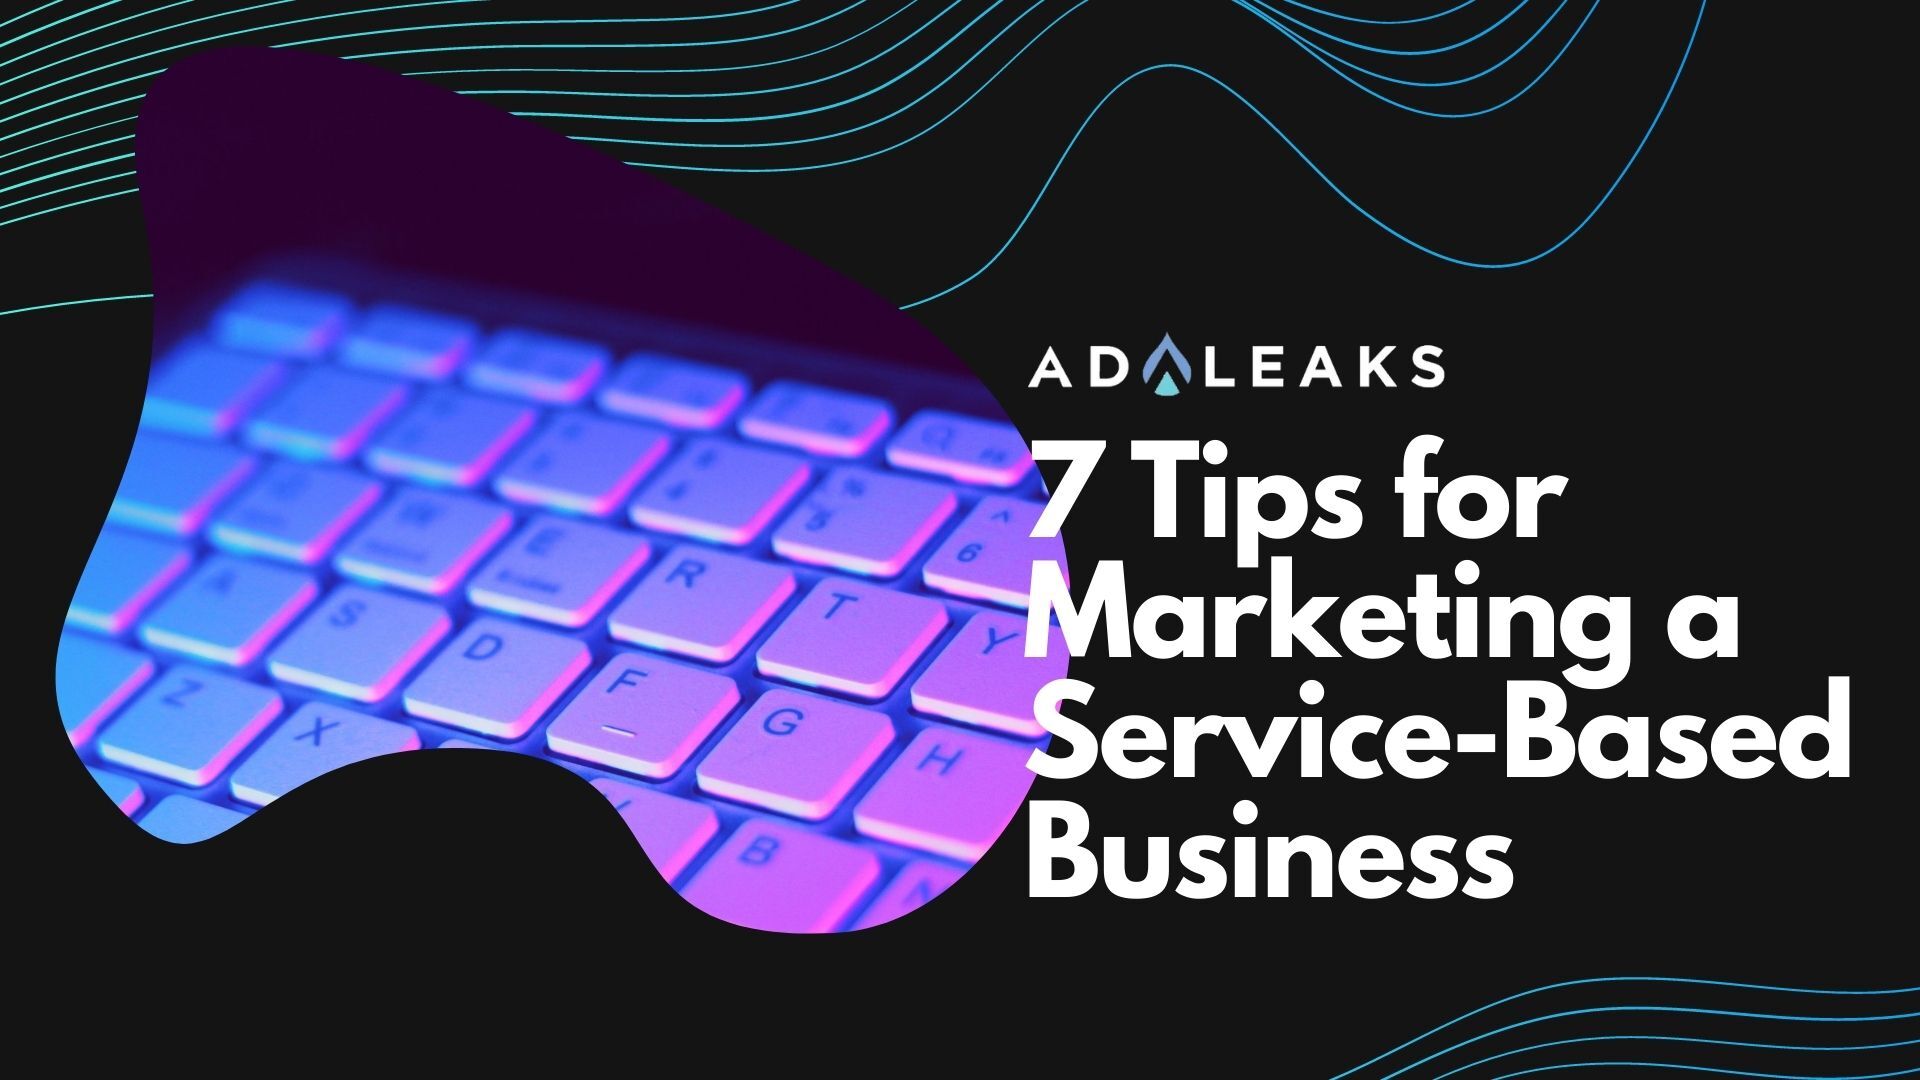 7 tips for marketing a service-based business featured